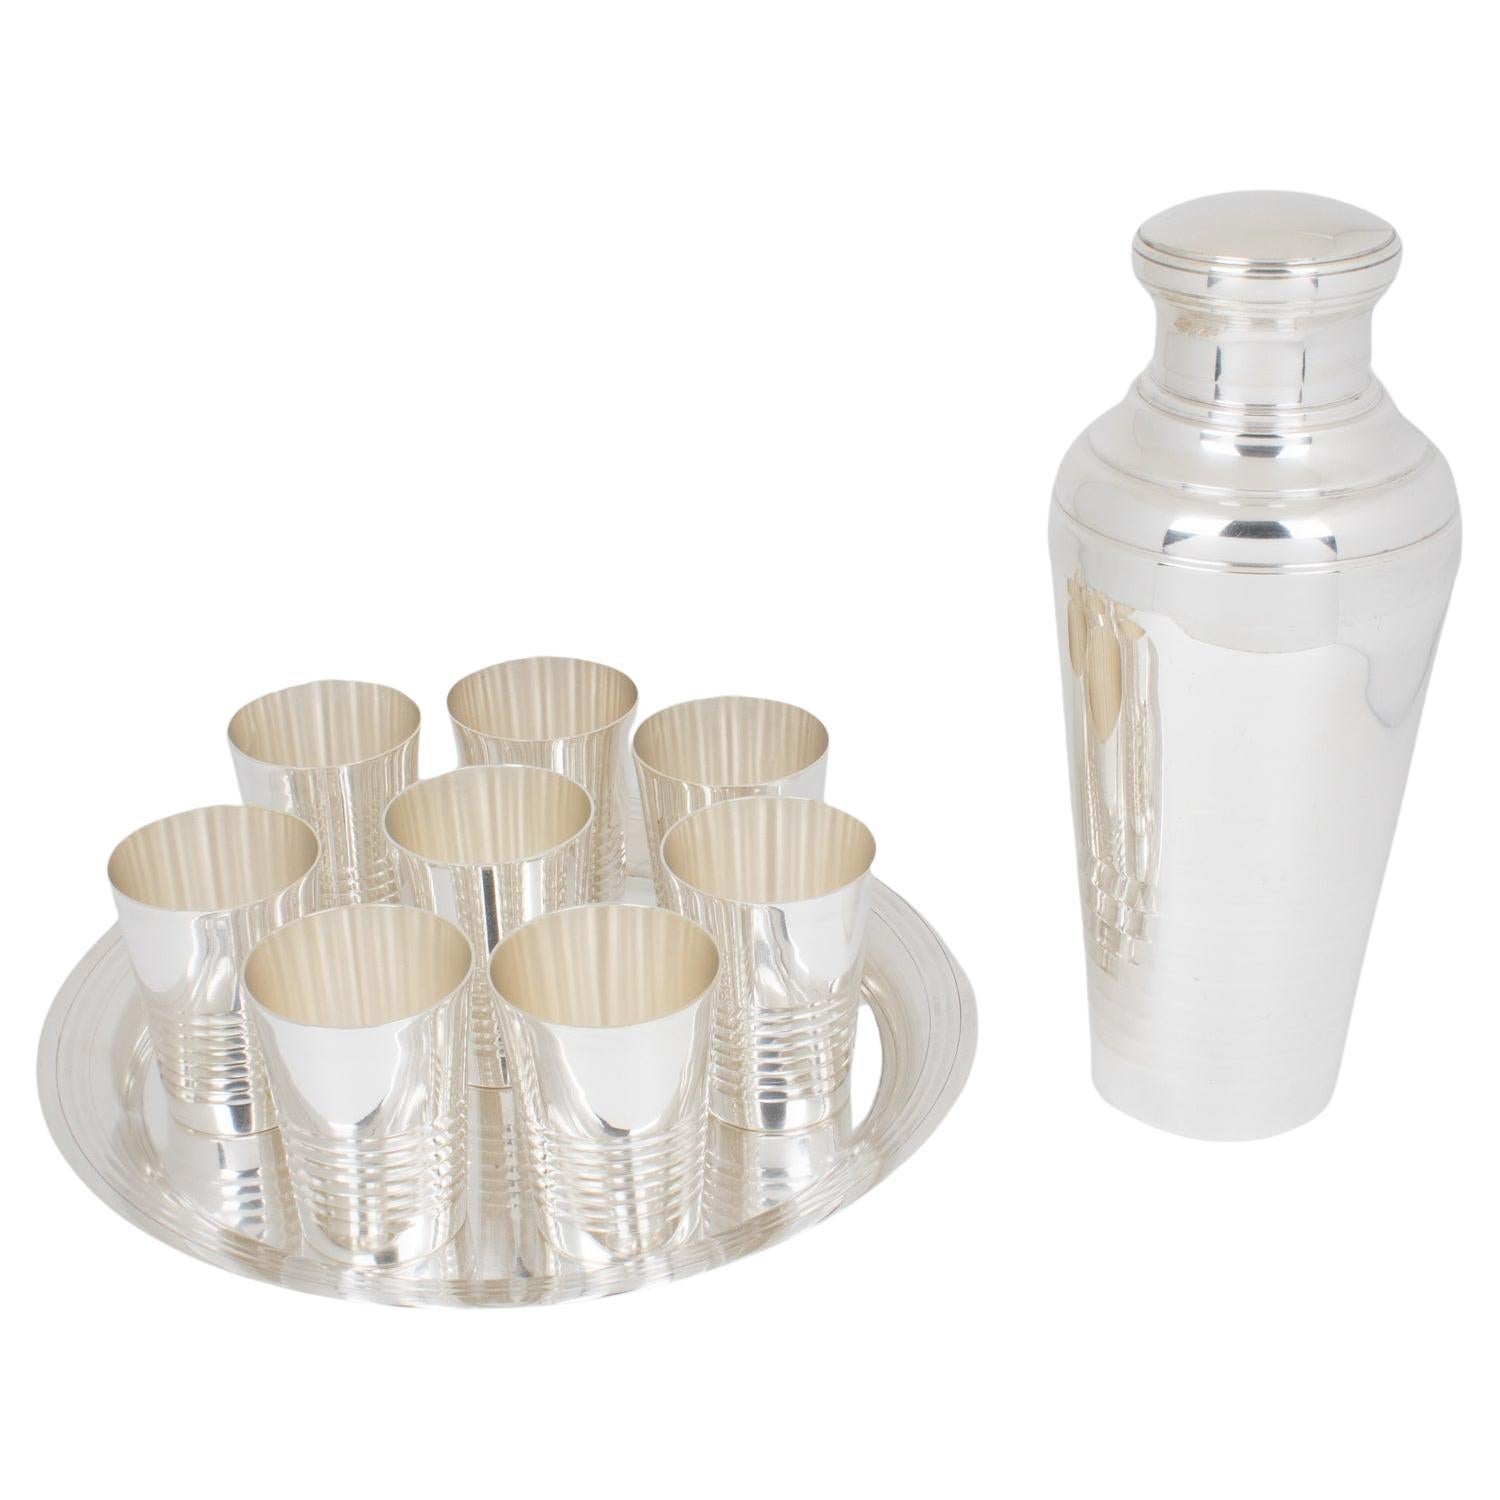 https://a.1stdibscdn.com/art-deco-barware-silver-plate-cocktail-shaker-eight-glasses-and-tray-set-1940s-for-sale/f_16322/f_372567621701056355882/f_37256762_1701056356344_bg_processed.jpg